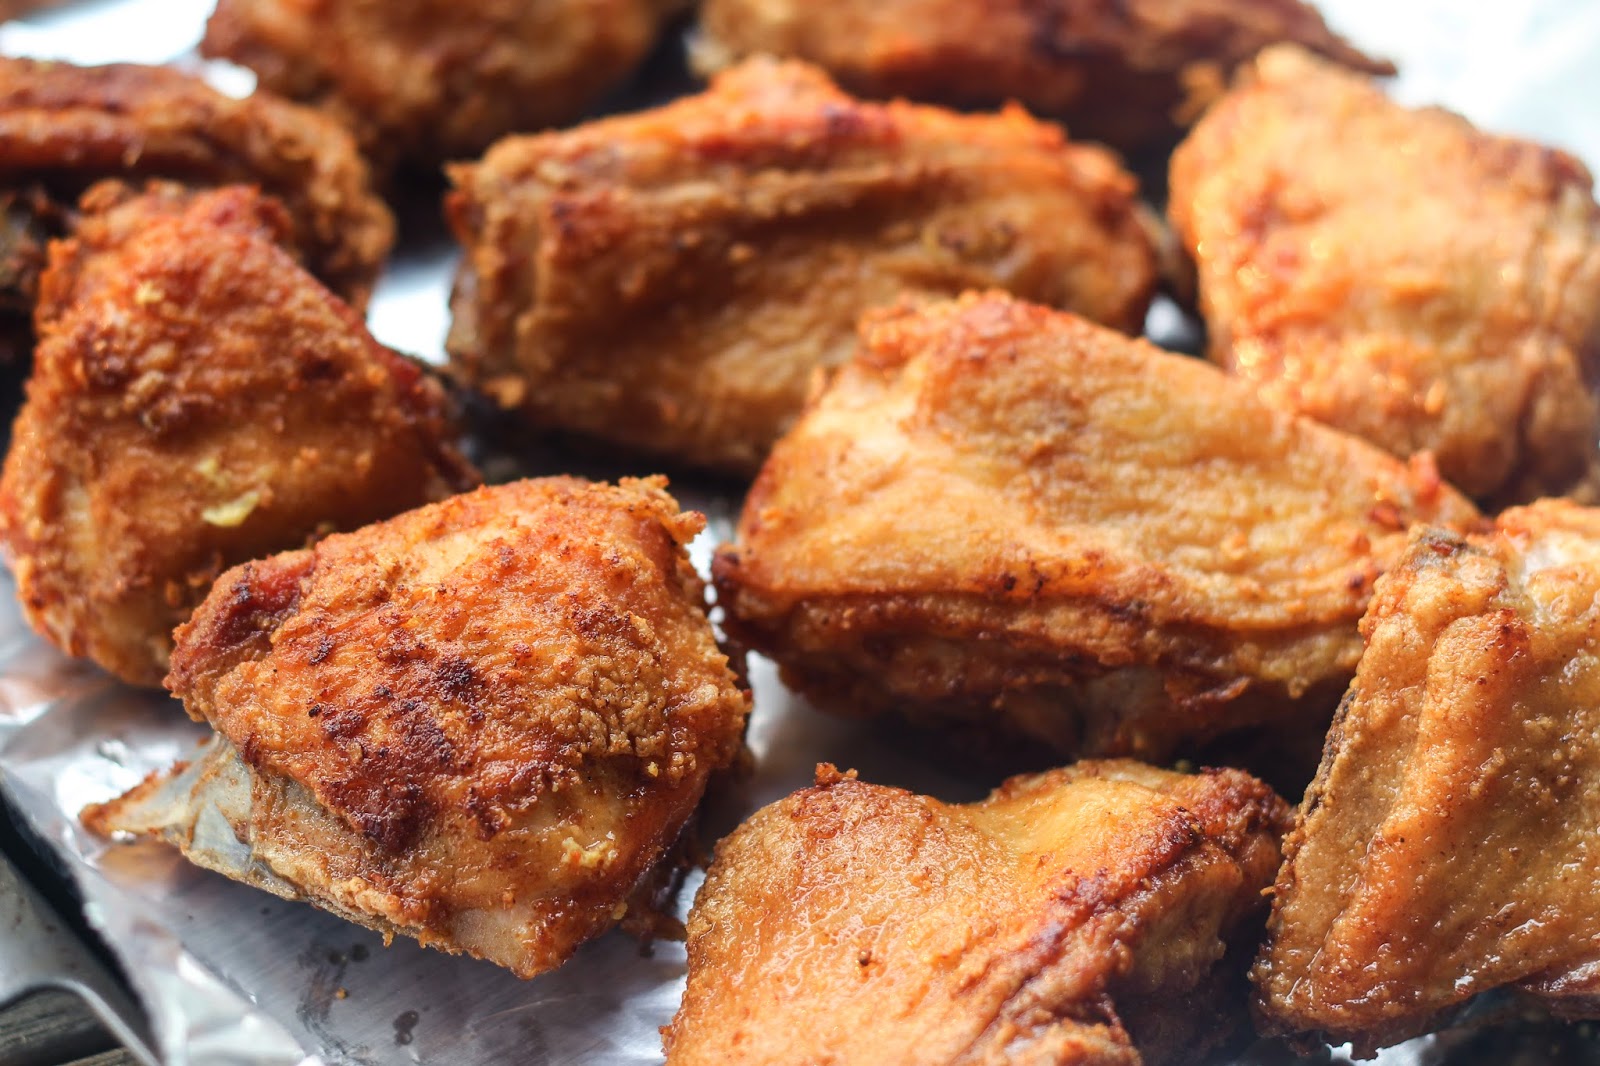 Spiced (Rempah) Fried Chicken or Ayam Goreng - The Food Canon